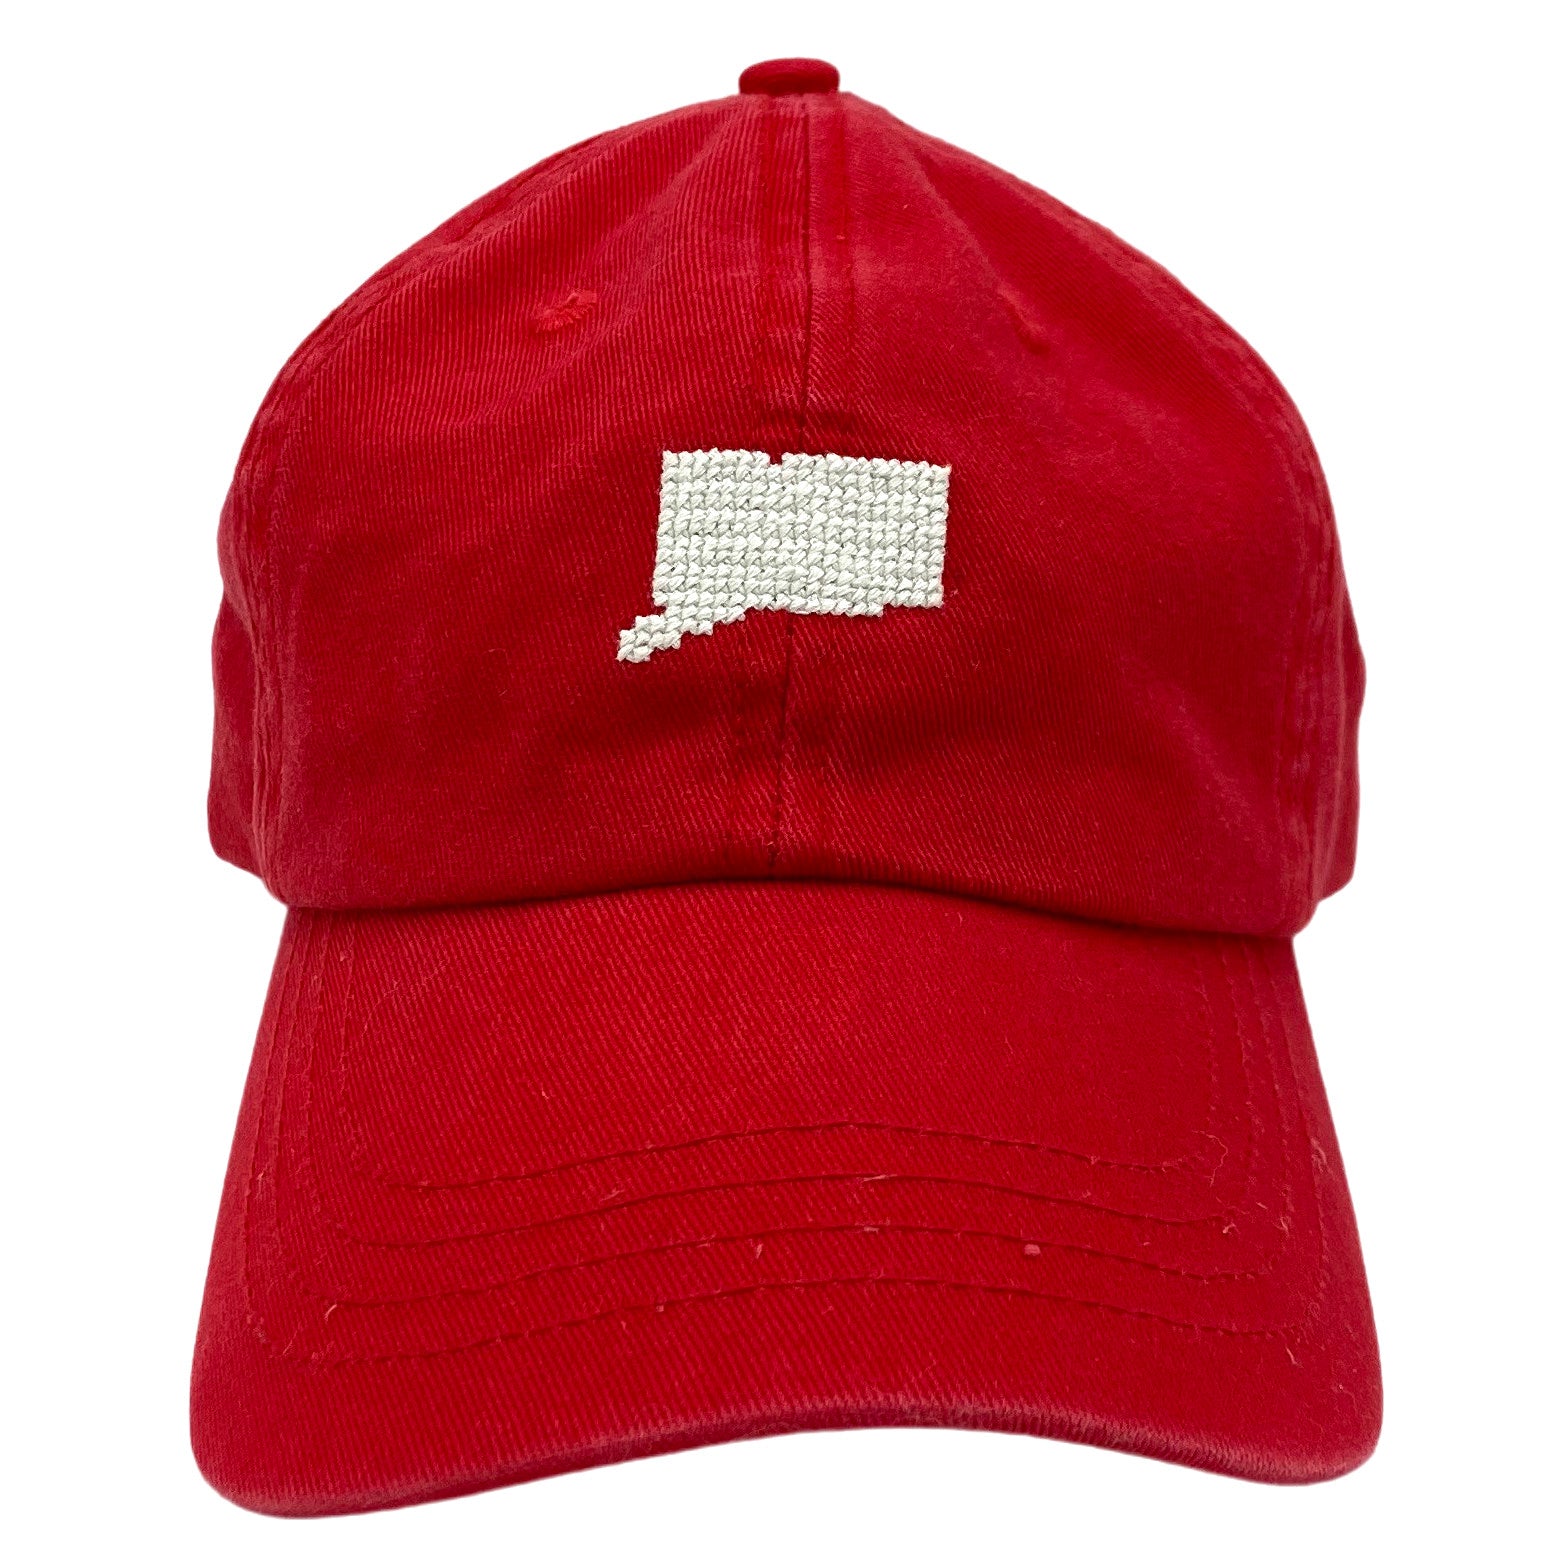 Connecticut on washed cherry red hat